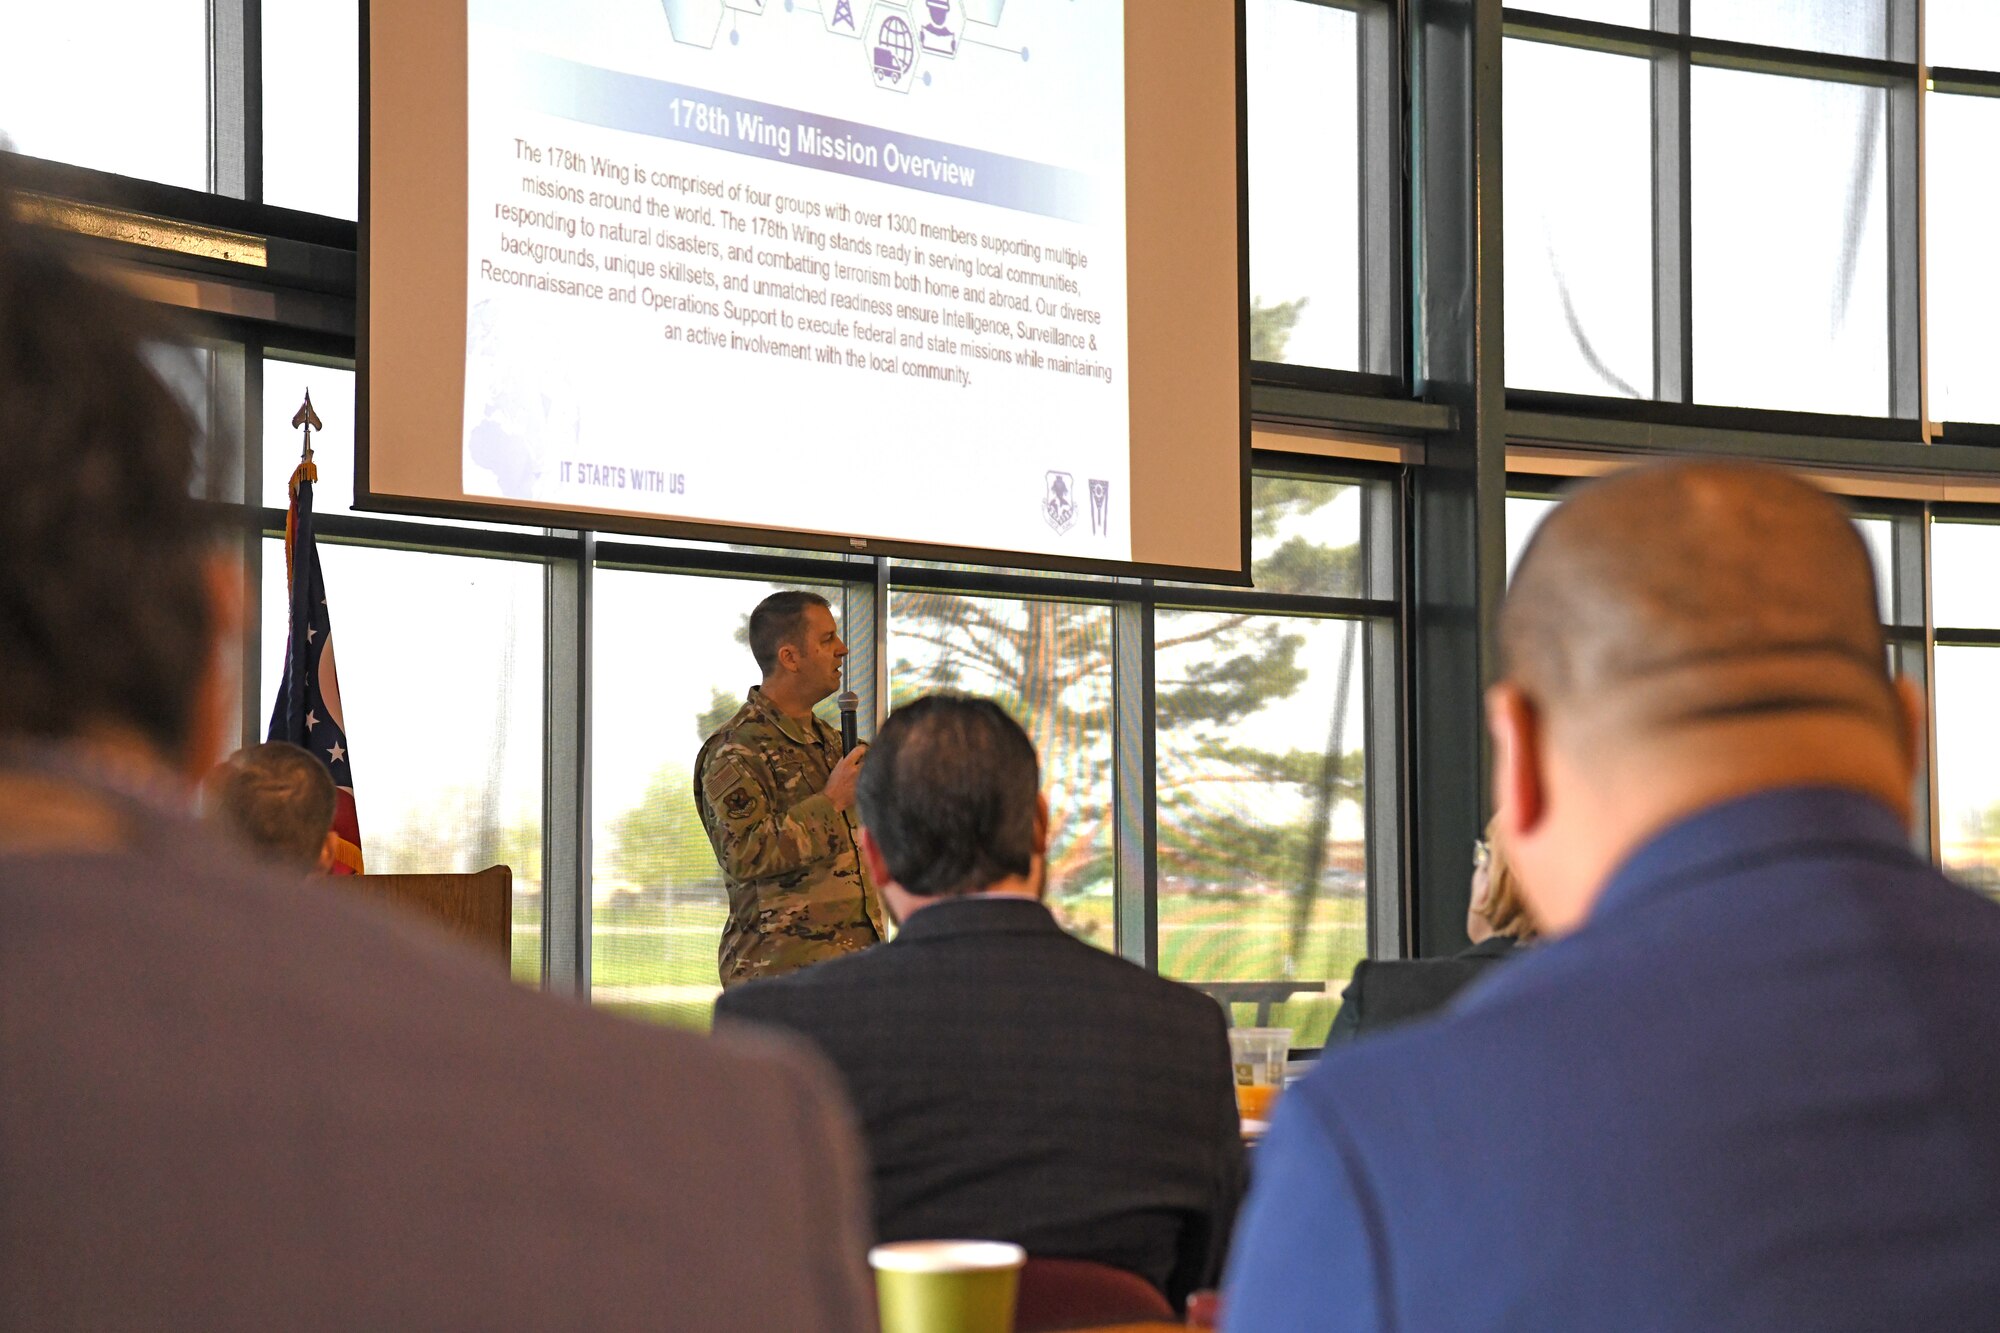 Commander of the 178th Wing, Col. Ken Kazmaier, opens an informational brief during the wing's Community Day, April 20, 2023 in Springfield, Ohio. The event consisted of a briefing on the wing's capabilities and a base tour. (U.S. Air National Guard photo by Senior Airman Jill Maynus)